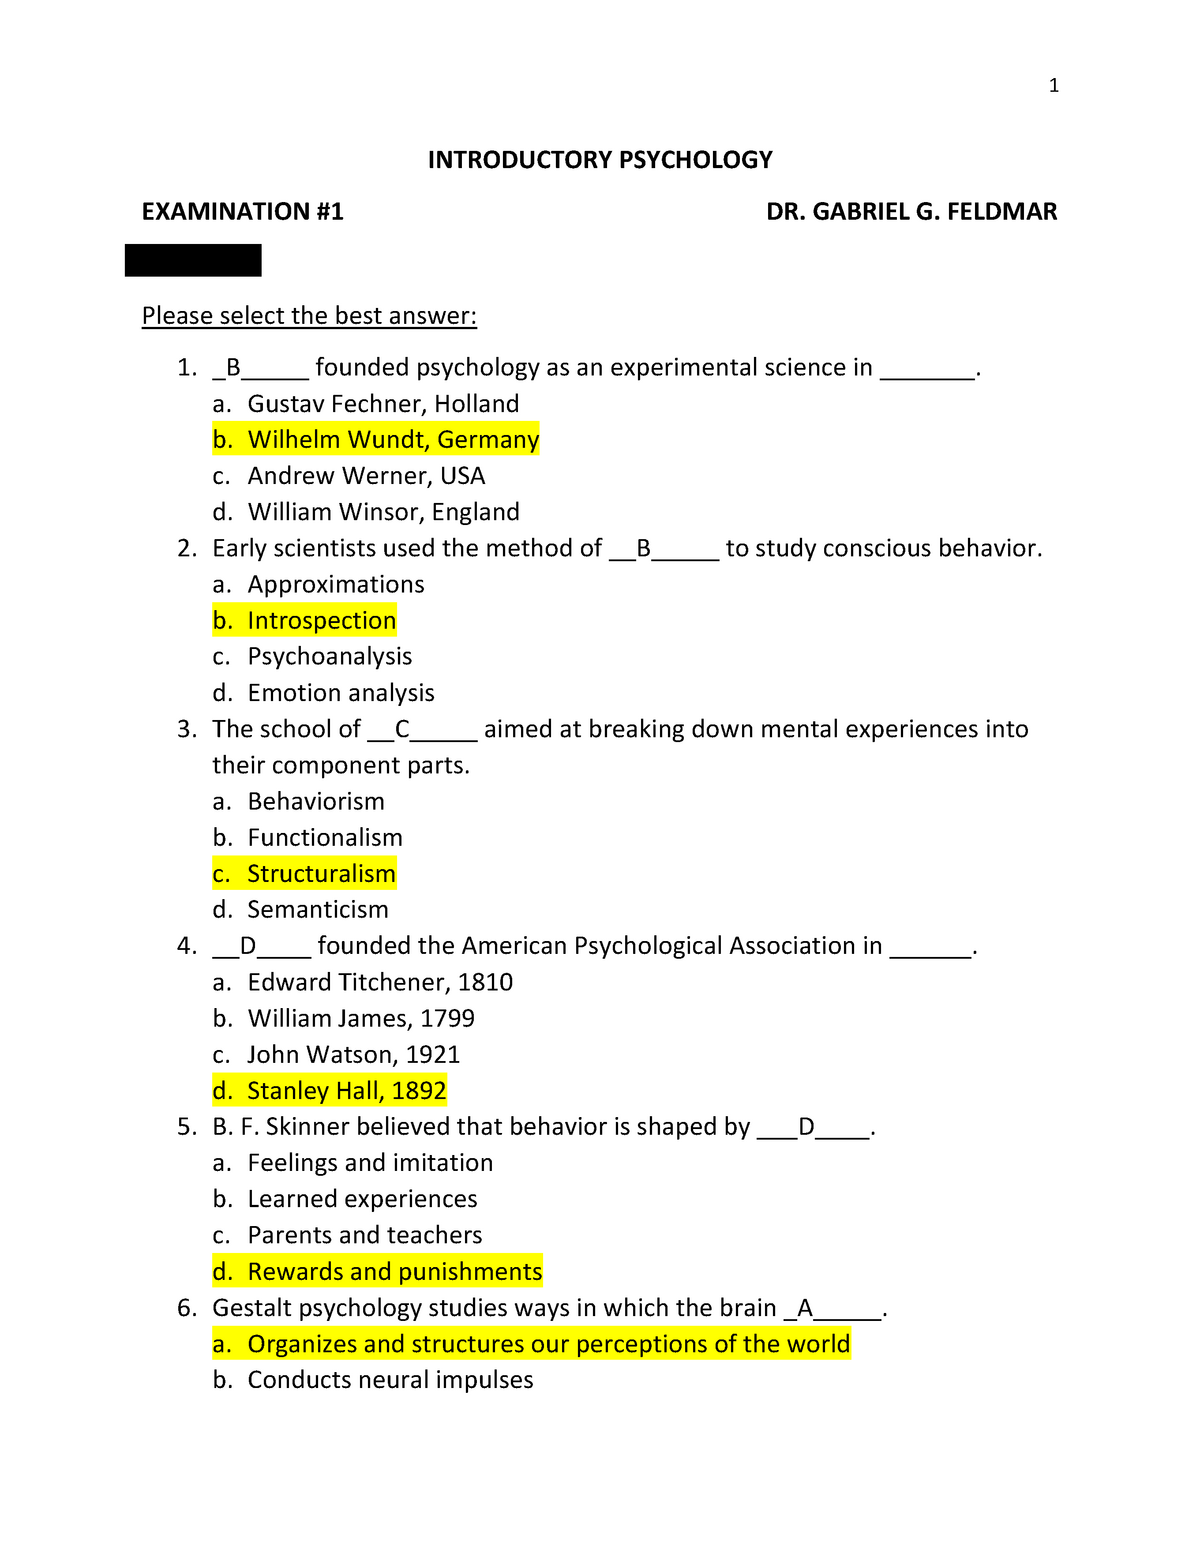 Intro Psych Exam 1 Practice w answers INTRODUCTORY PSYCHOLOGY